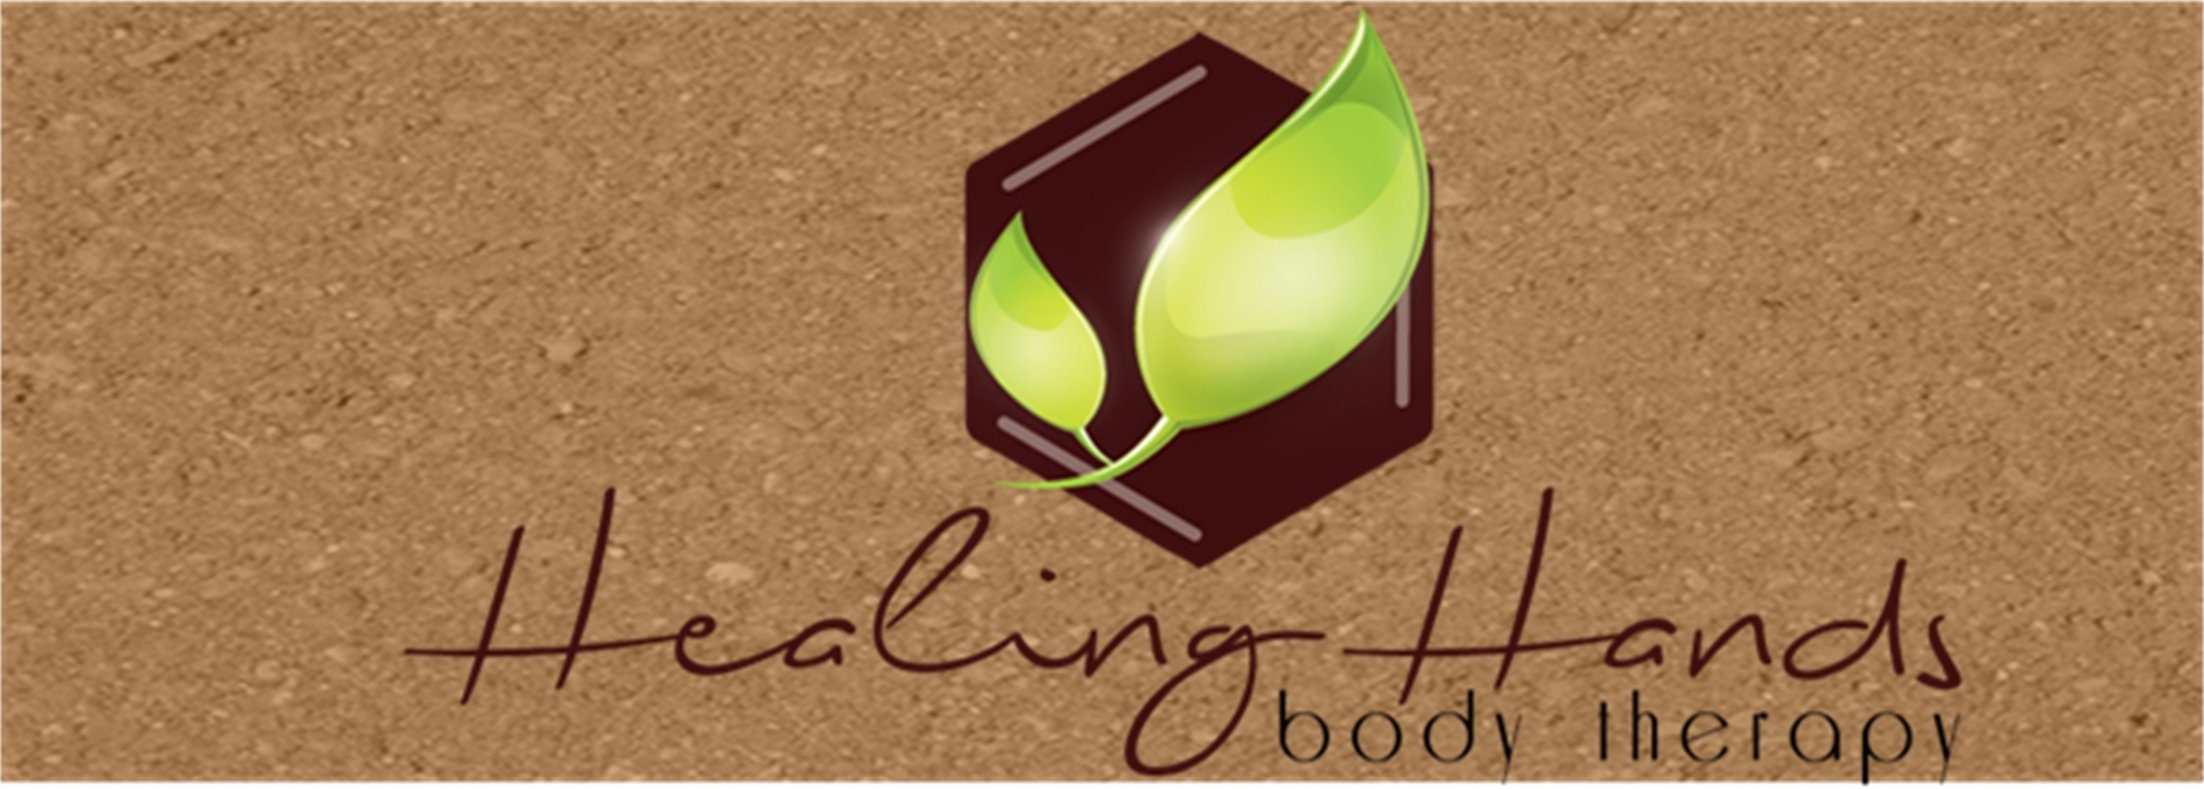 Healing Hands Body Therapy